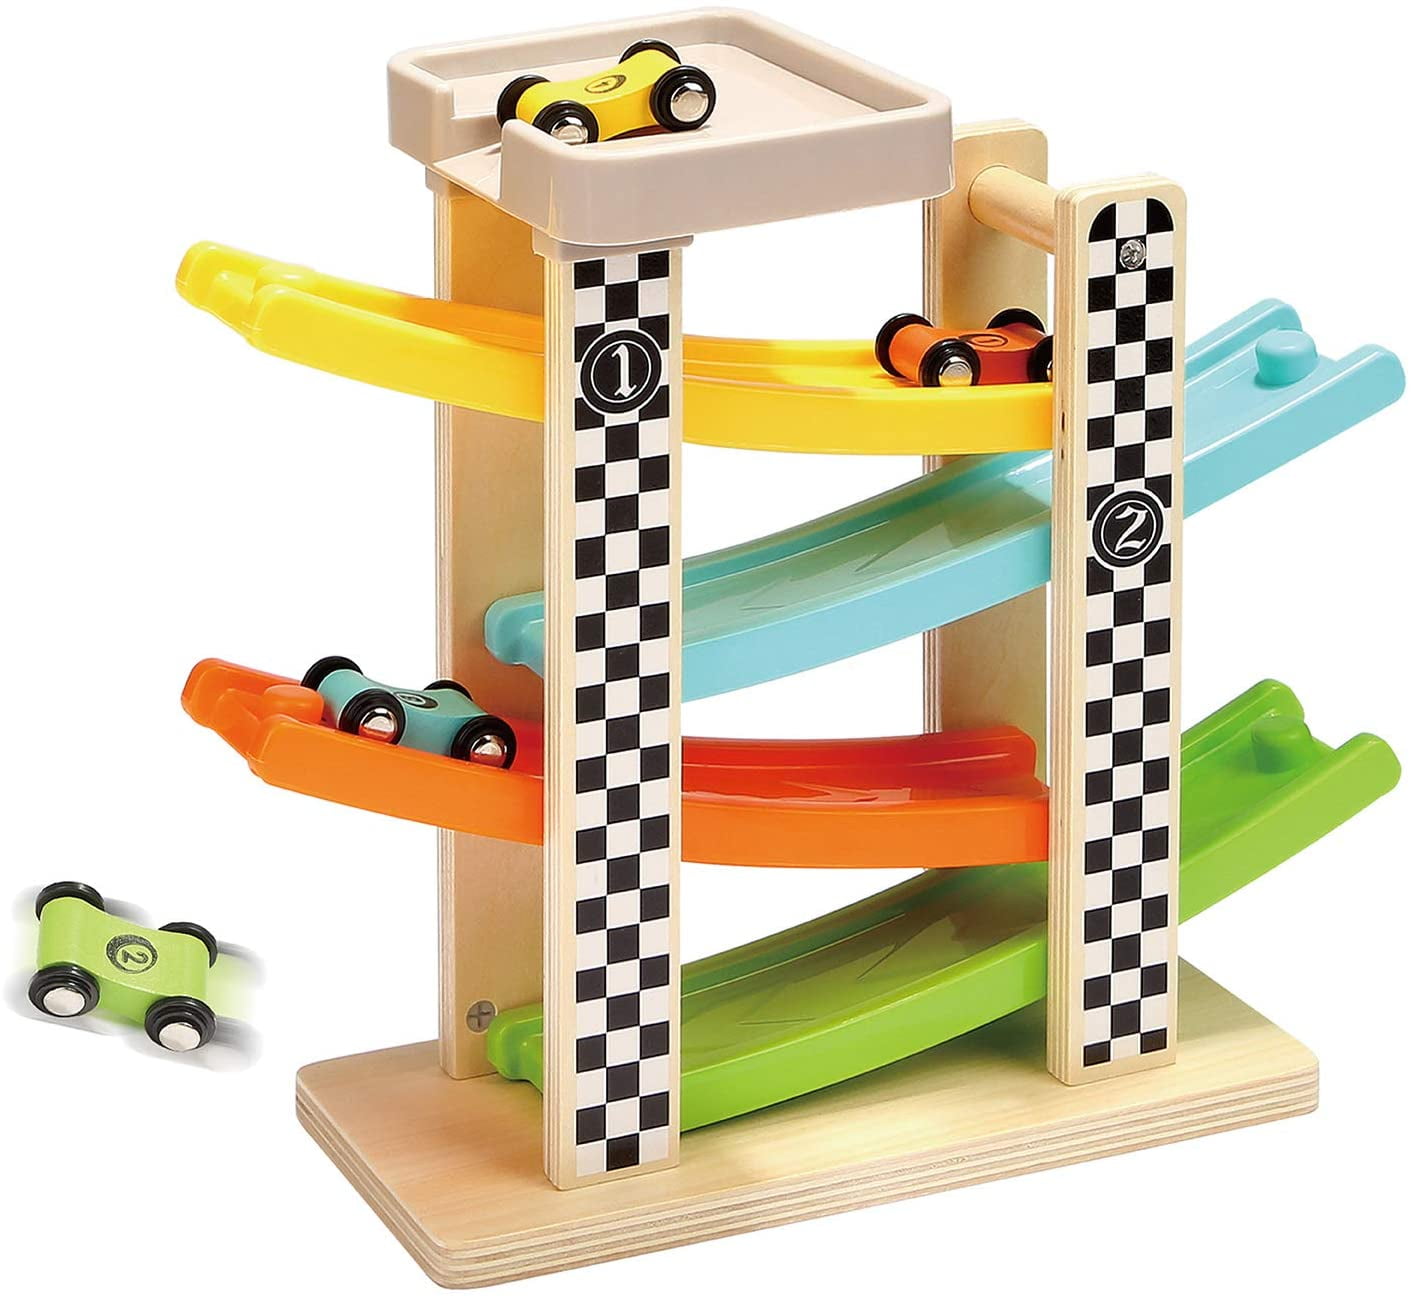 Toddler Toys Gifts Wooden Race Track Car Ramp Racer With 4 Mini Cars For Kids 